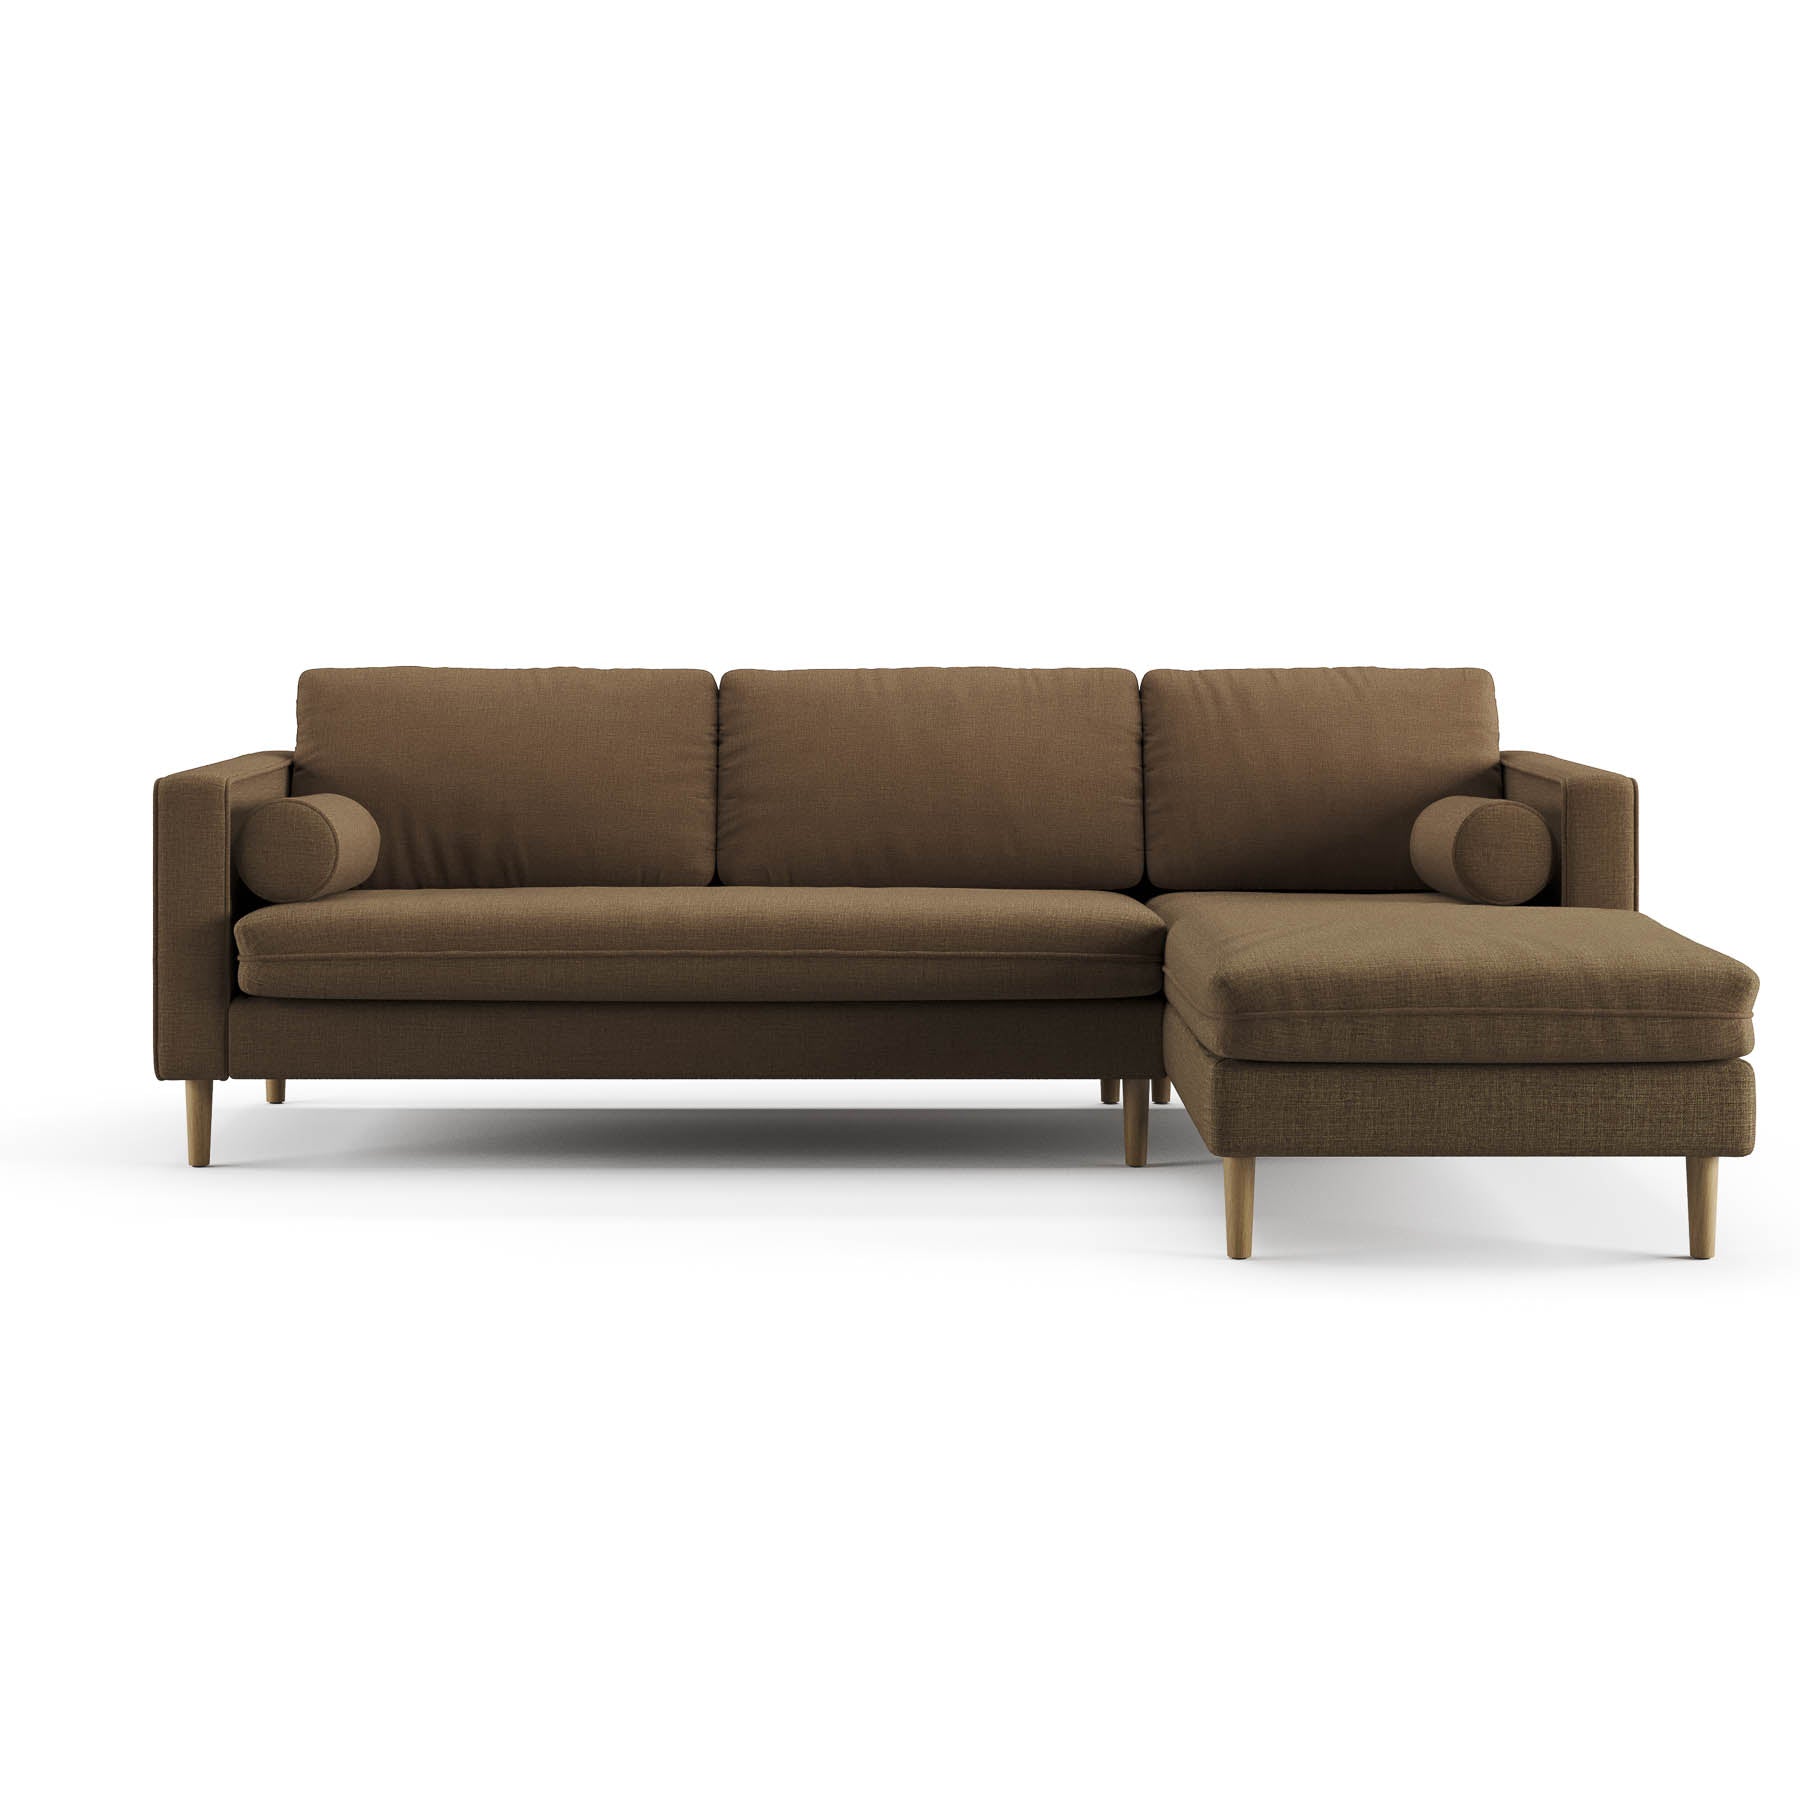 umber-brown left-sectional